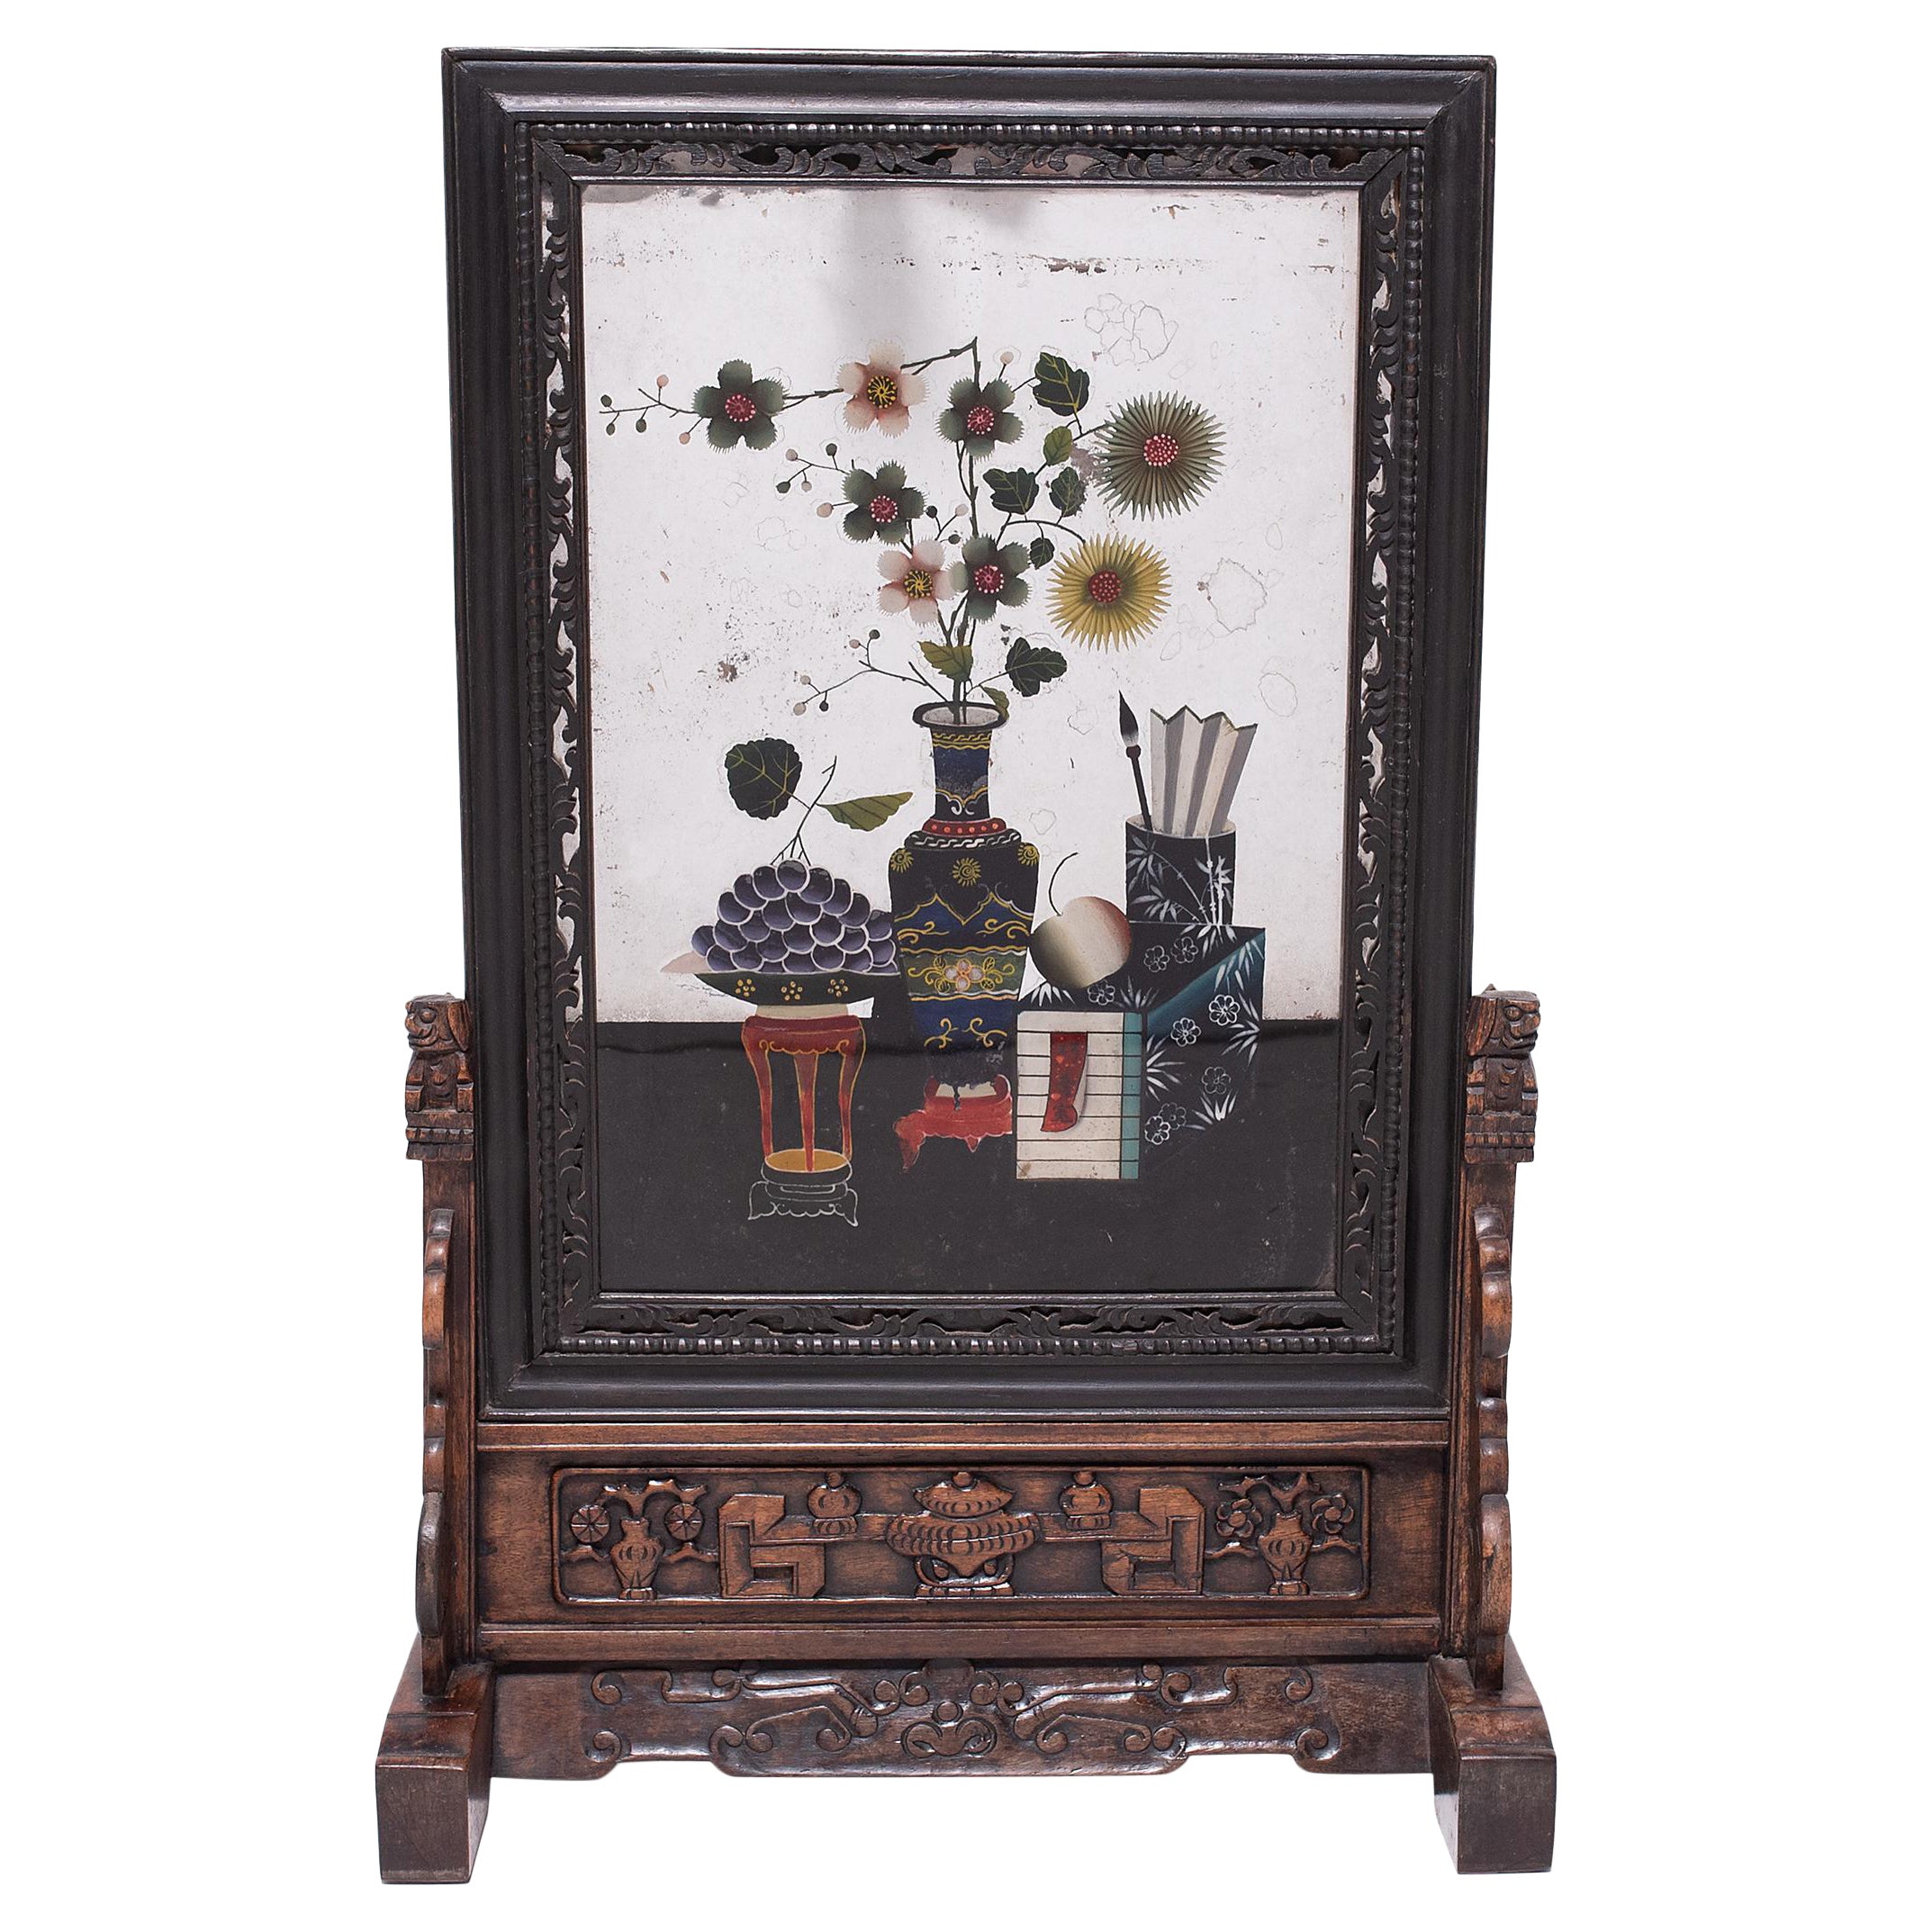 Chinese Reverse Glass Table Screen with Floral Still Life, c. 1850